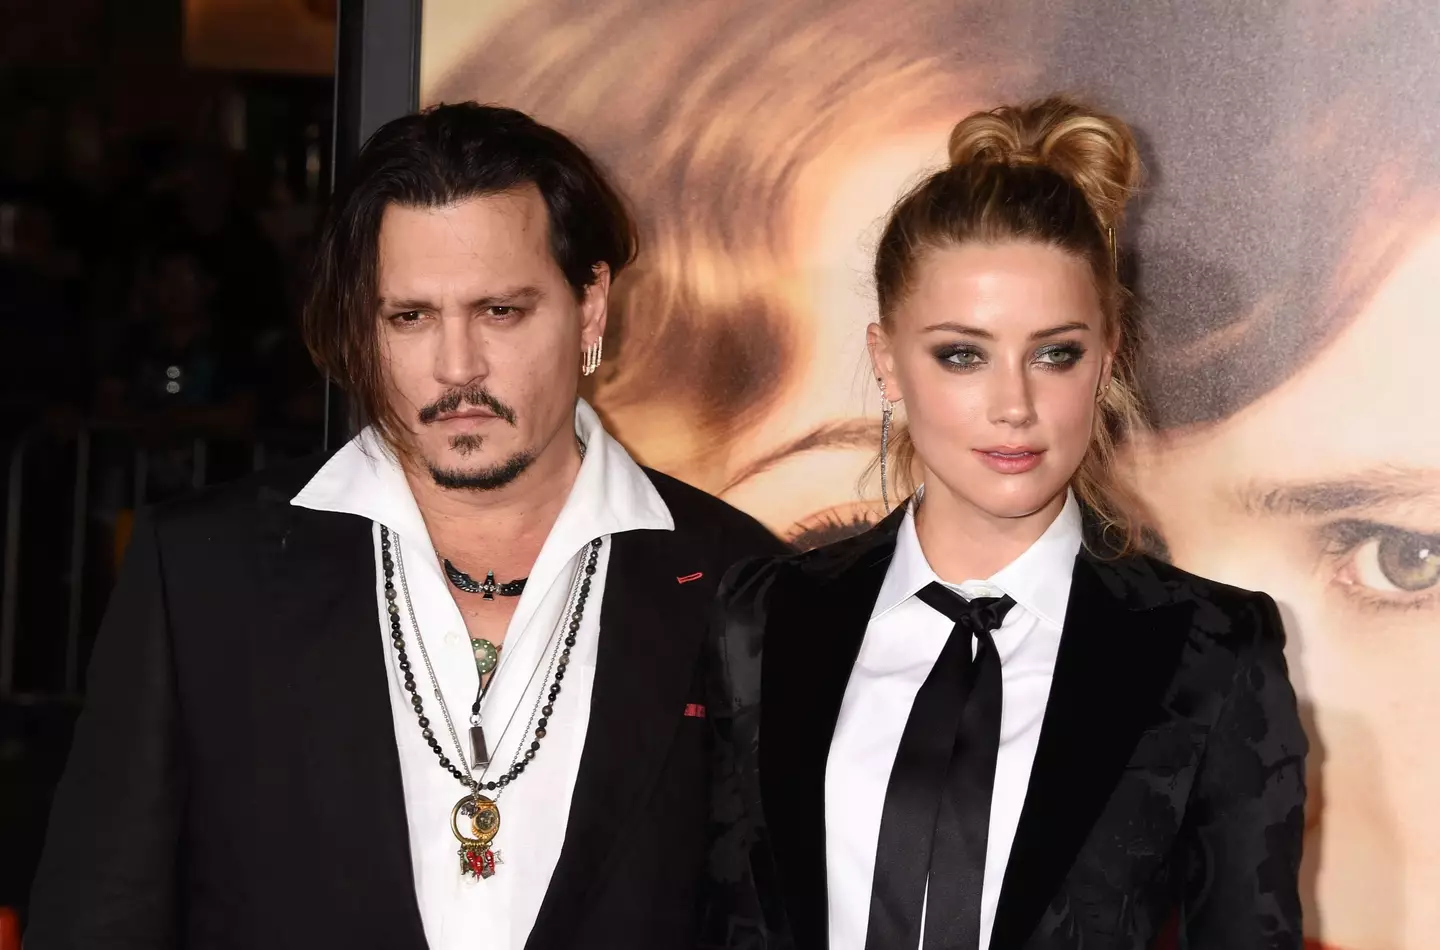 Johnny Depp and Amber Heard's defamation lawsuit is set to commence in court tomorrow, 11 April.